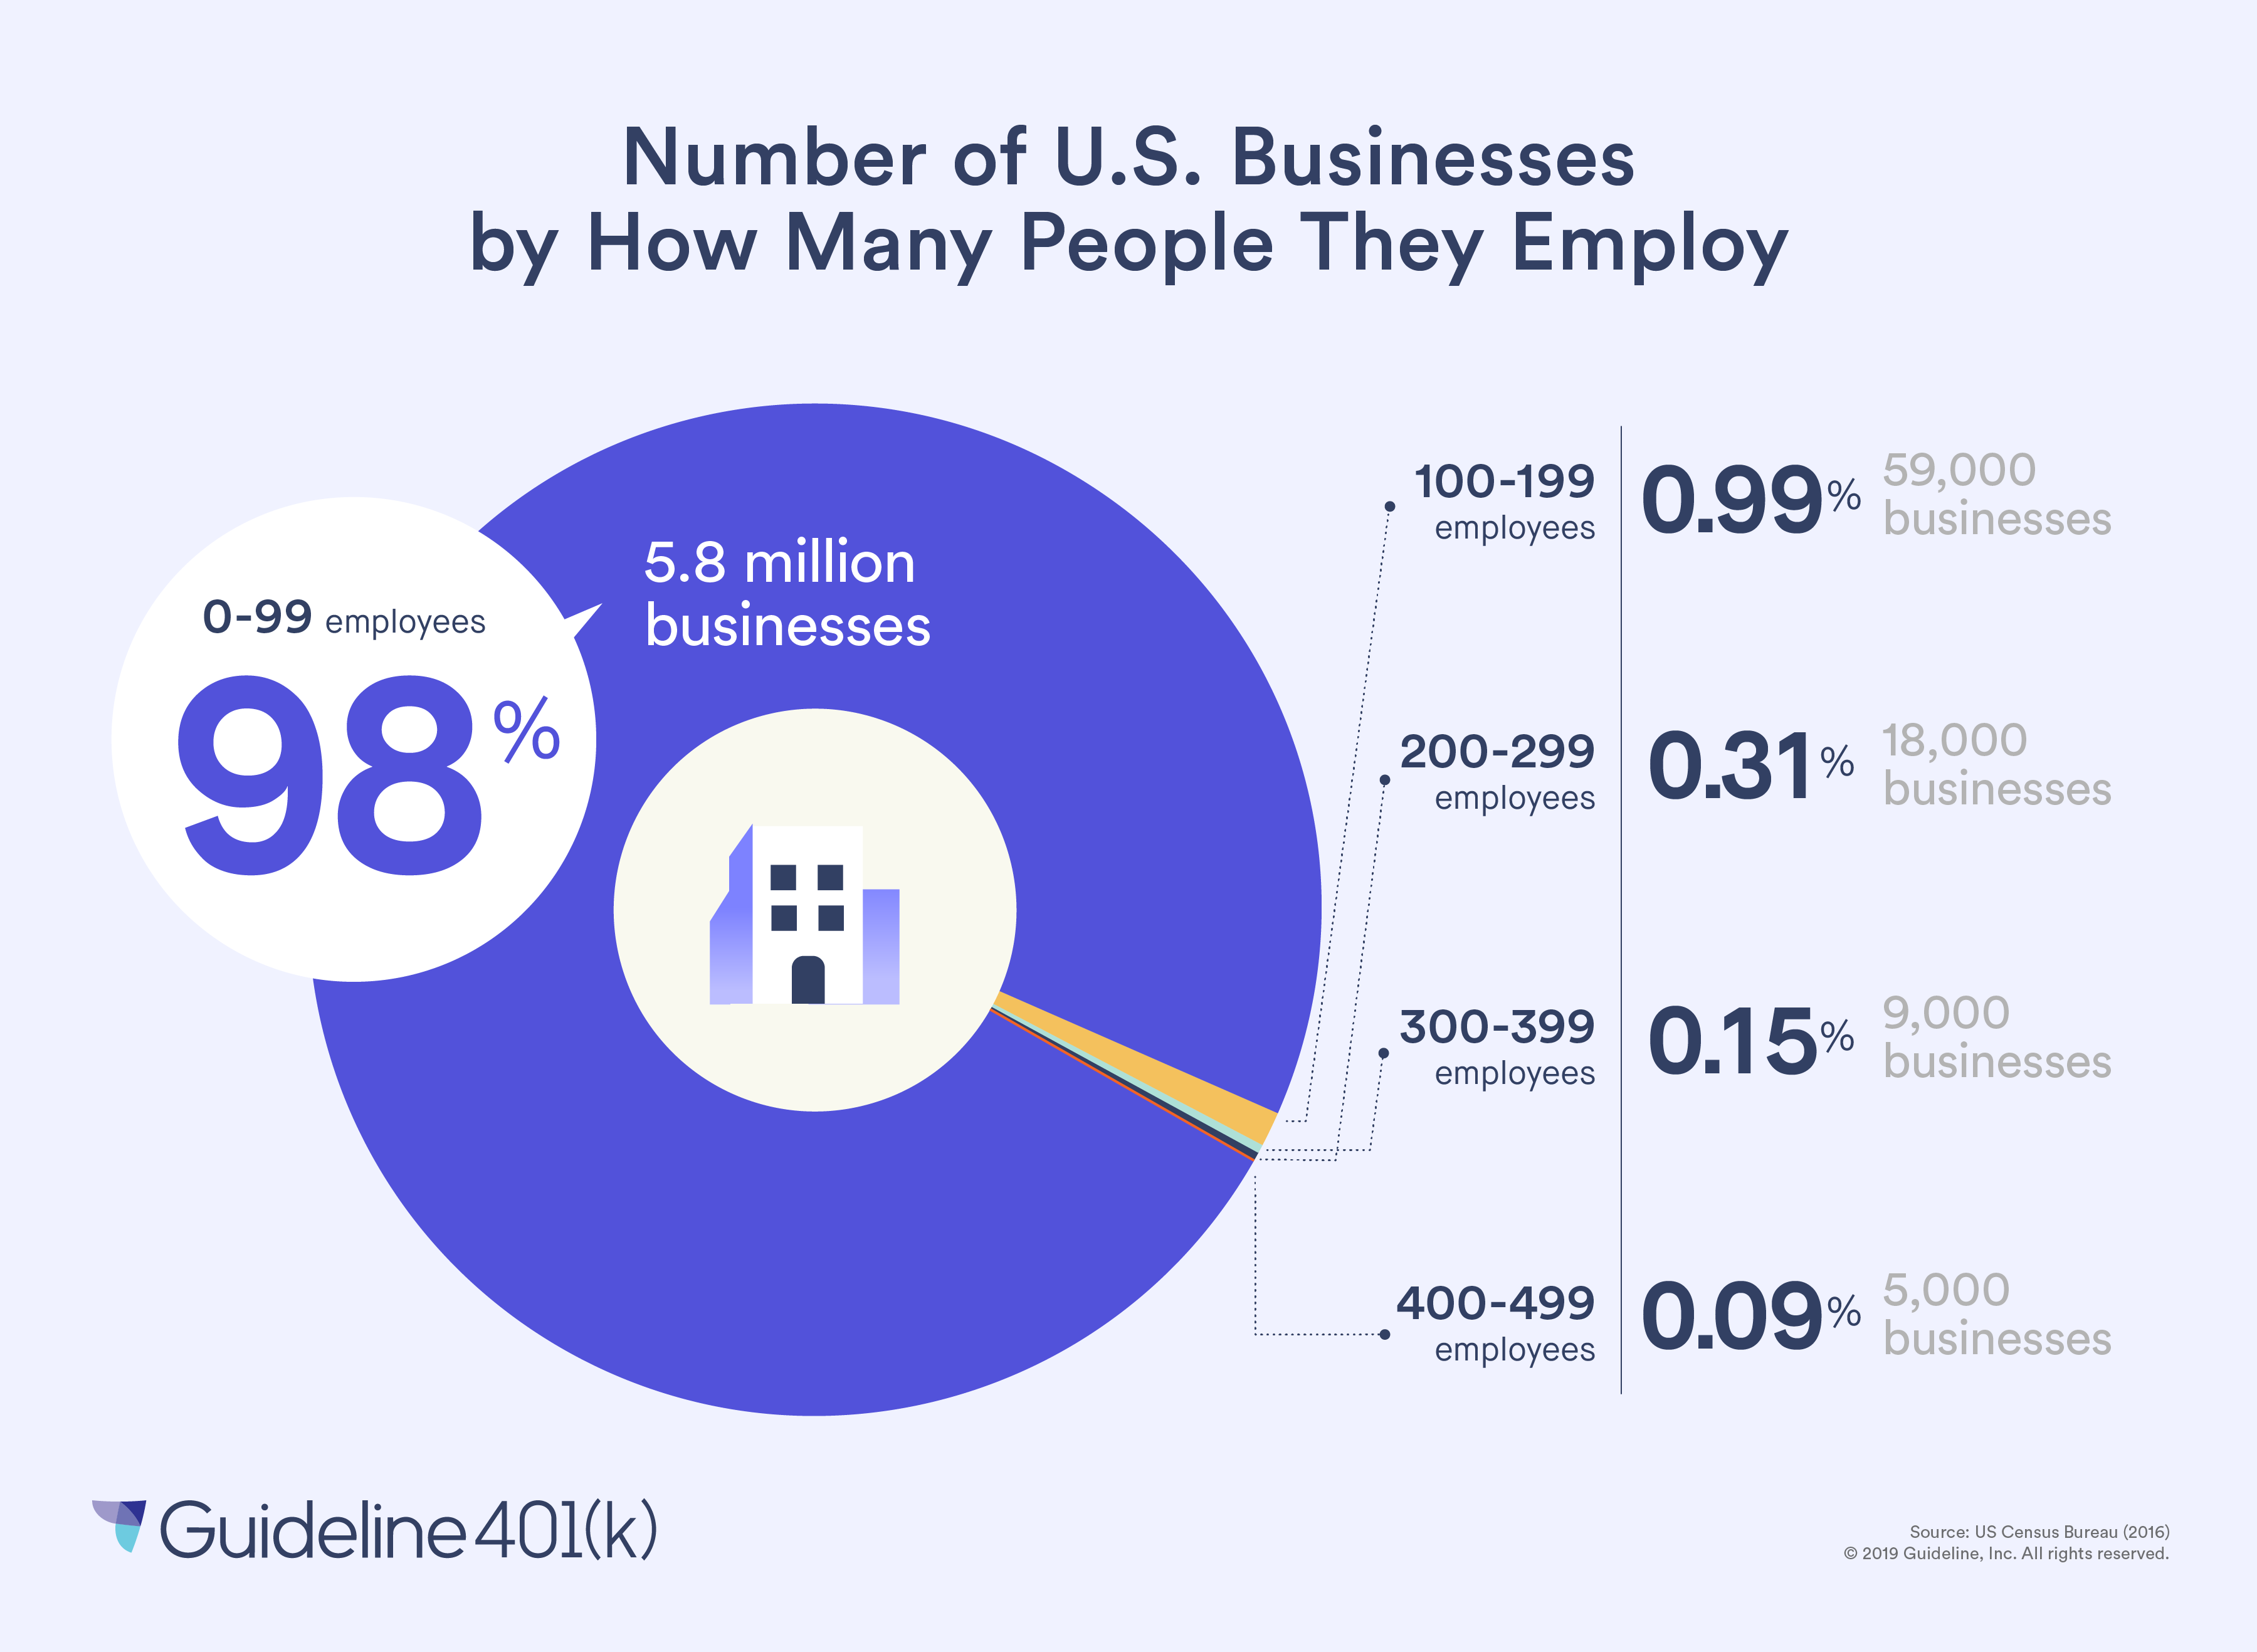 Number of U.S. businesses by how many people they employ